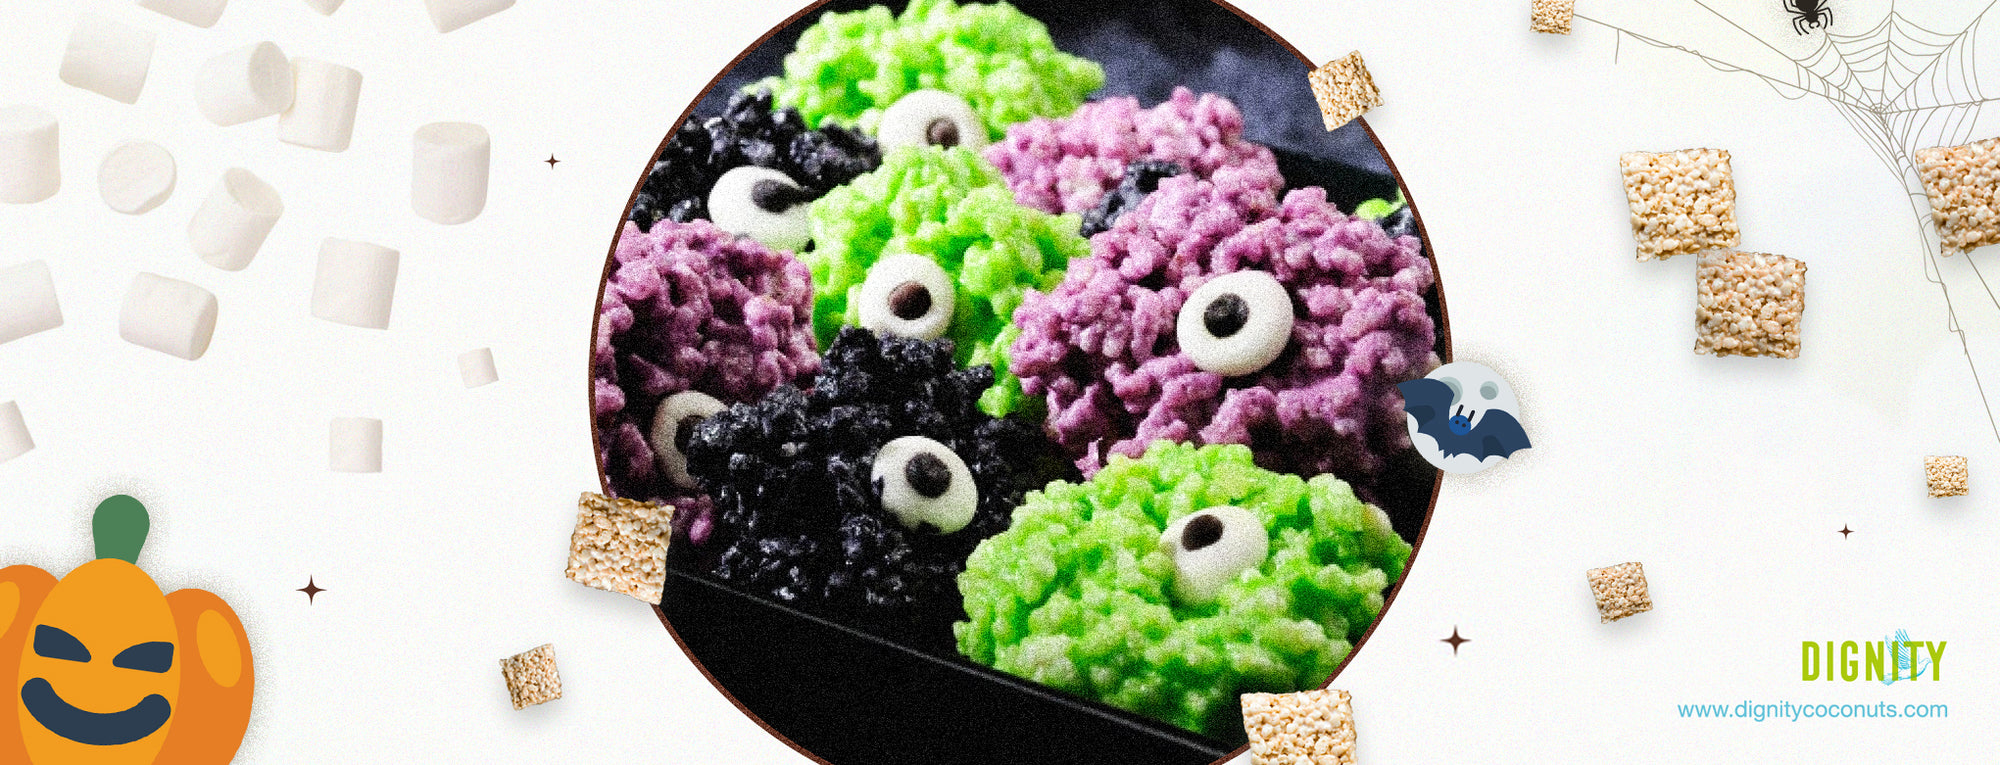 DELICIOUS RICE KRISPY TREATS THAT'LL TURN BOOS INTO WOWS